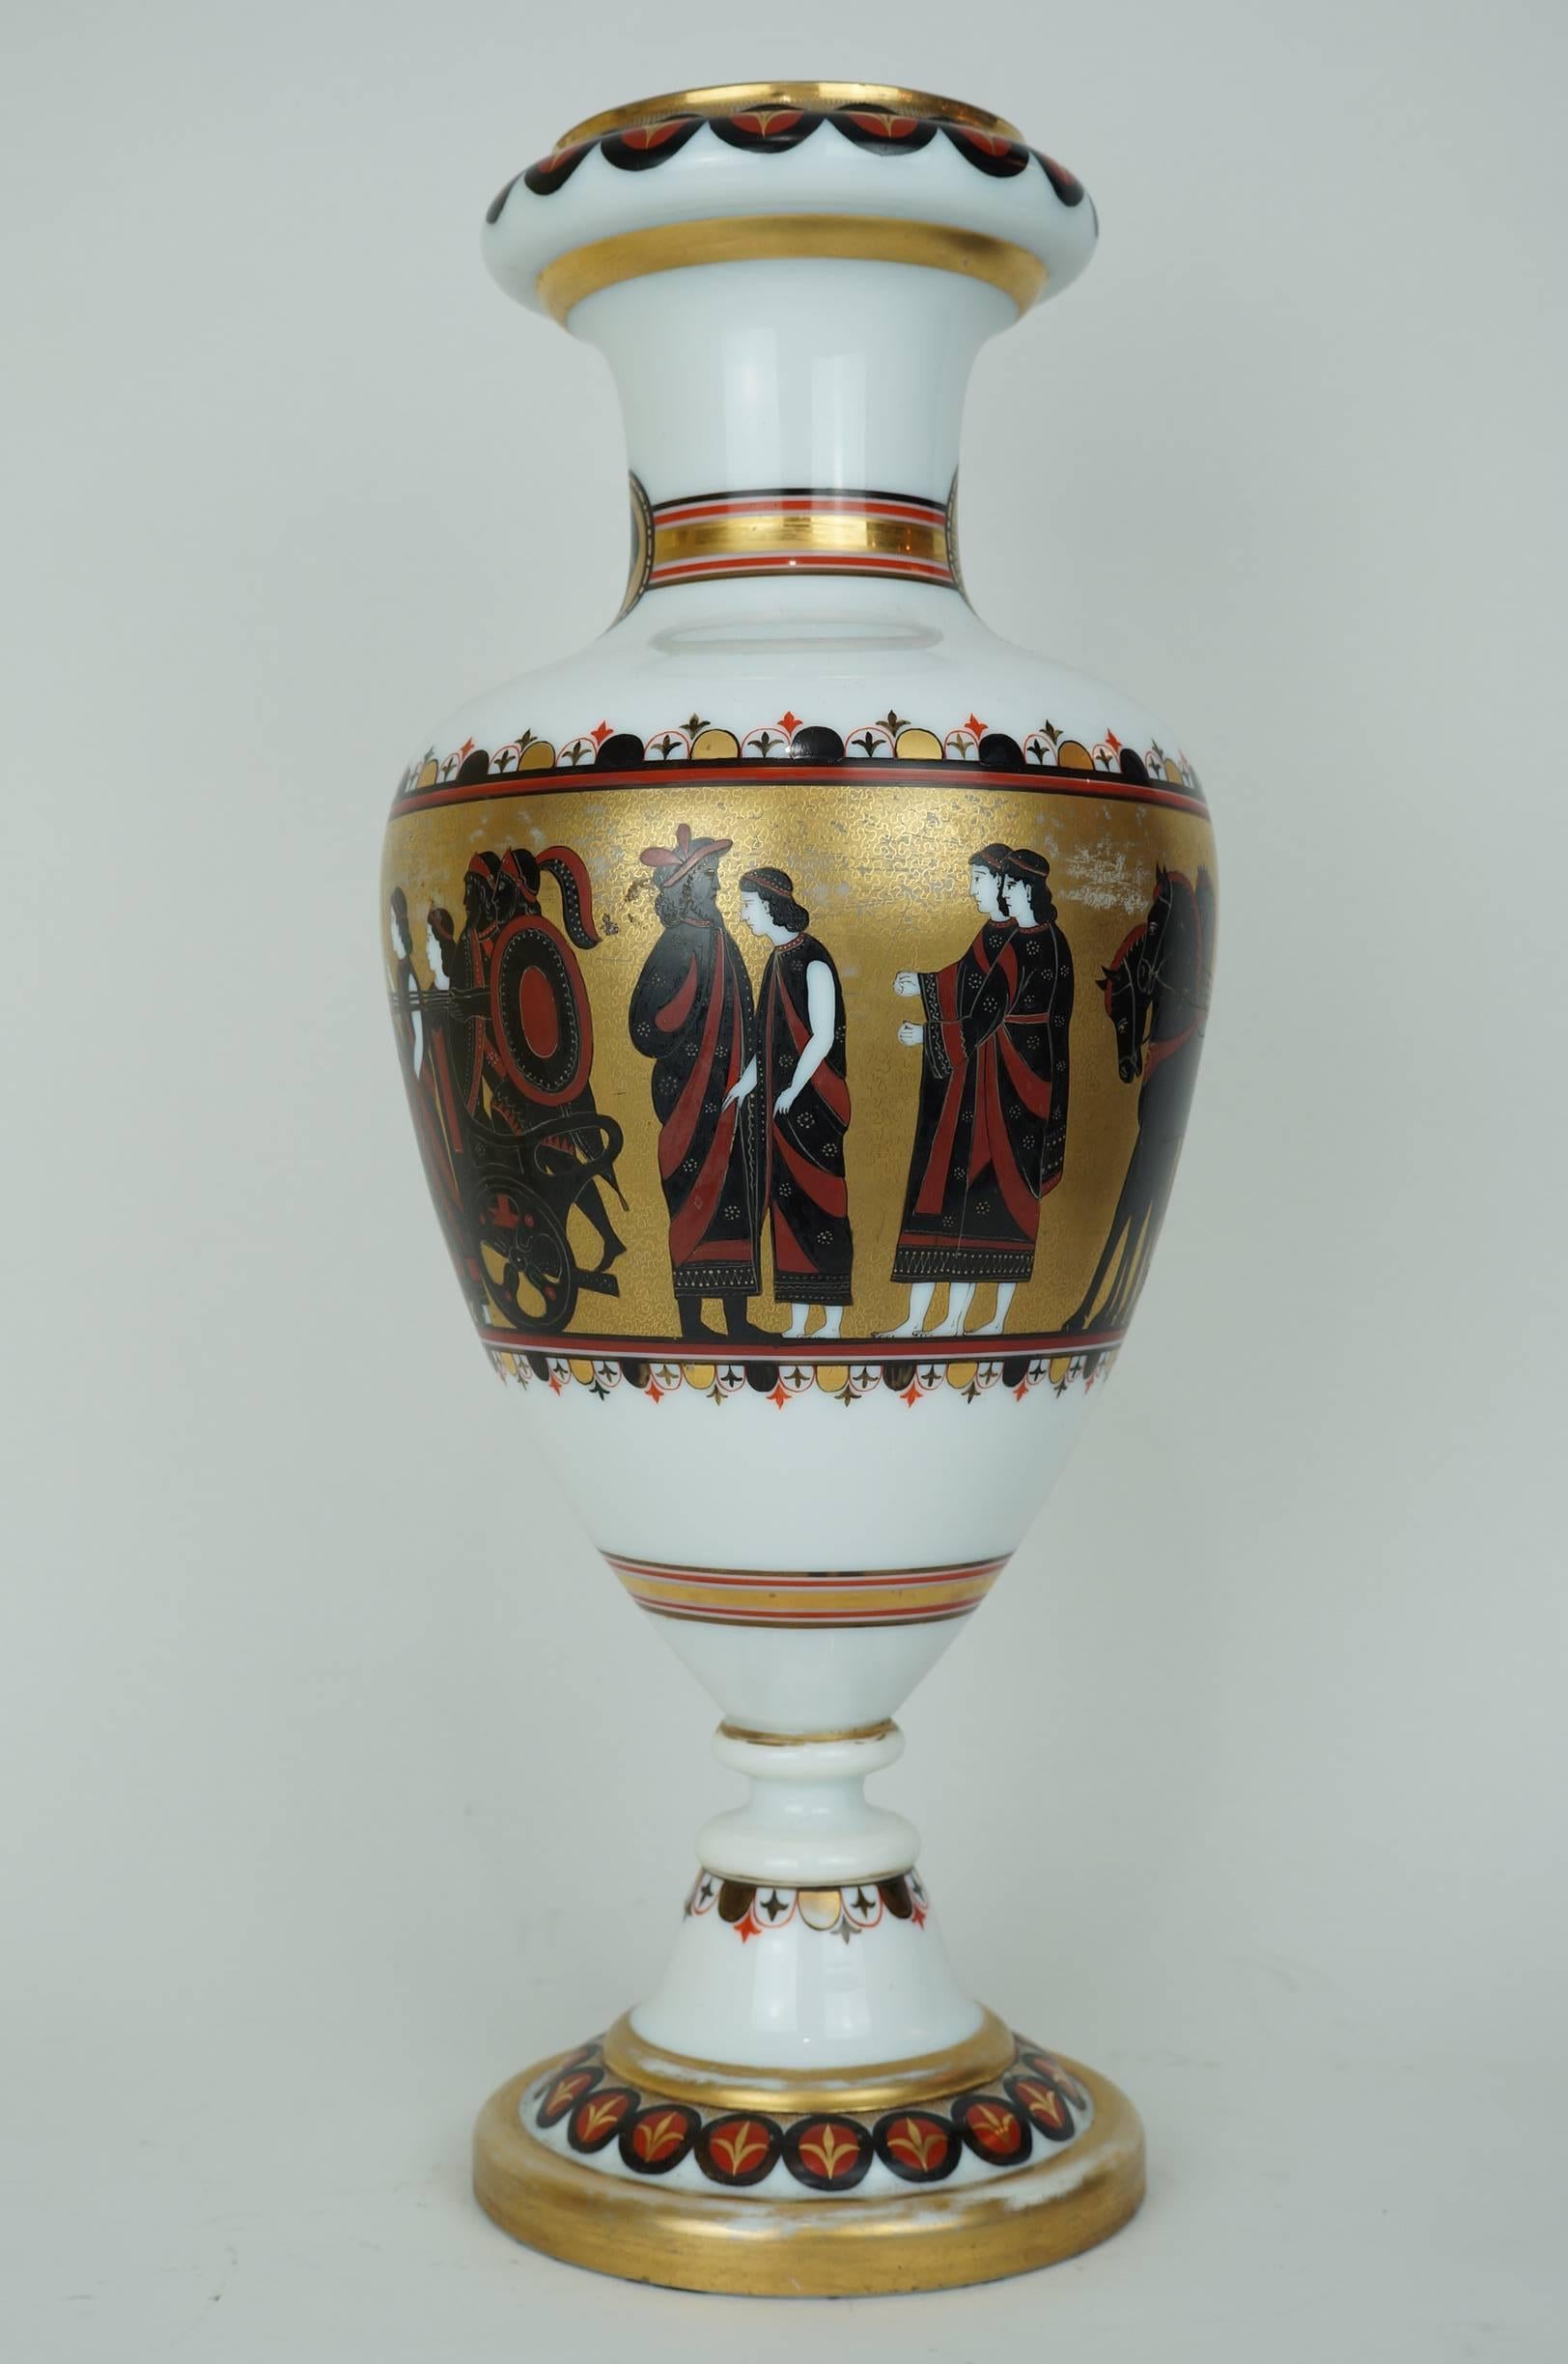 Neoclassical white opaline vase with gilt painted chariot scene.
Stock number: G37.